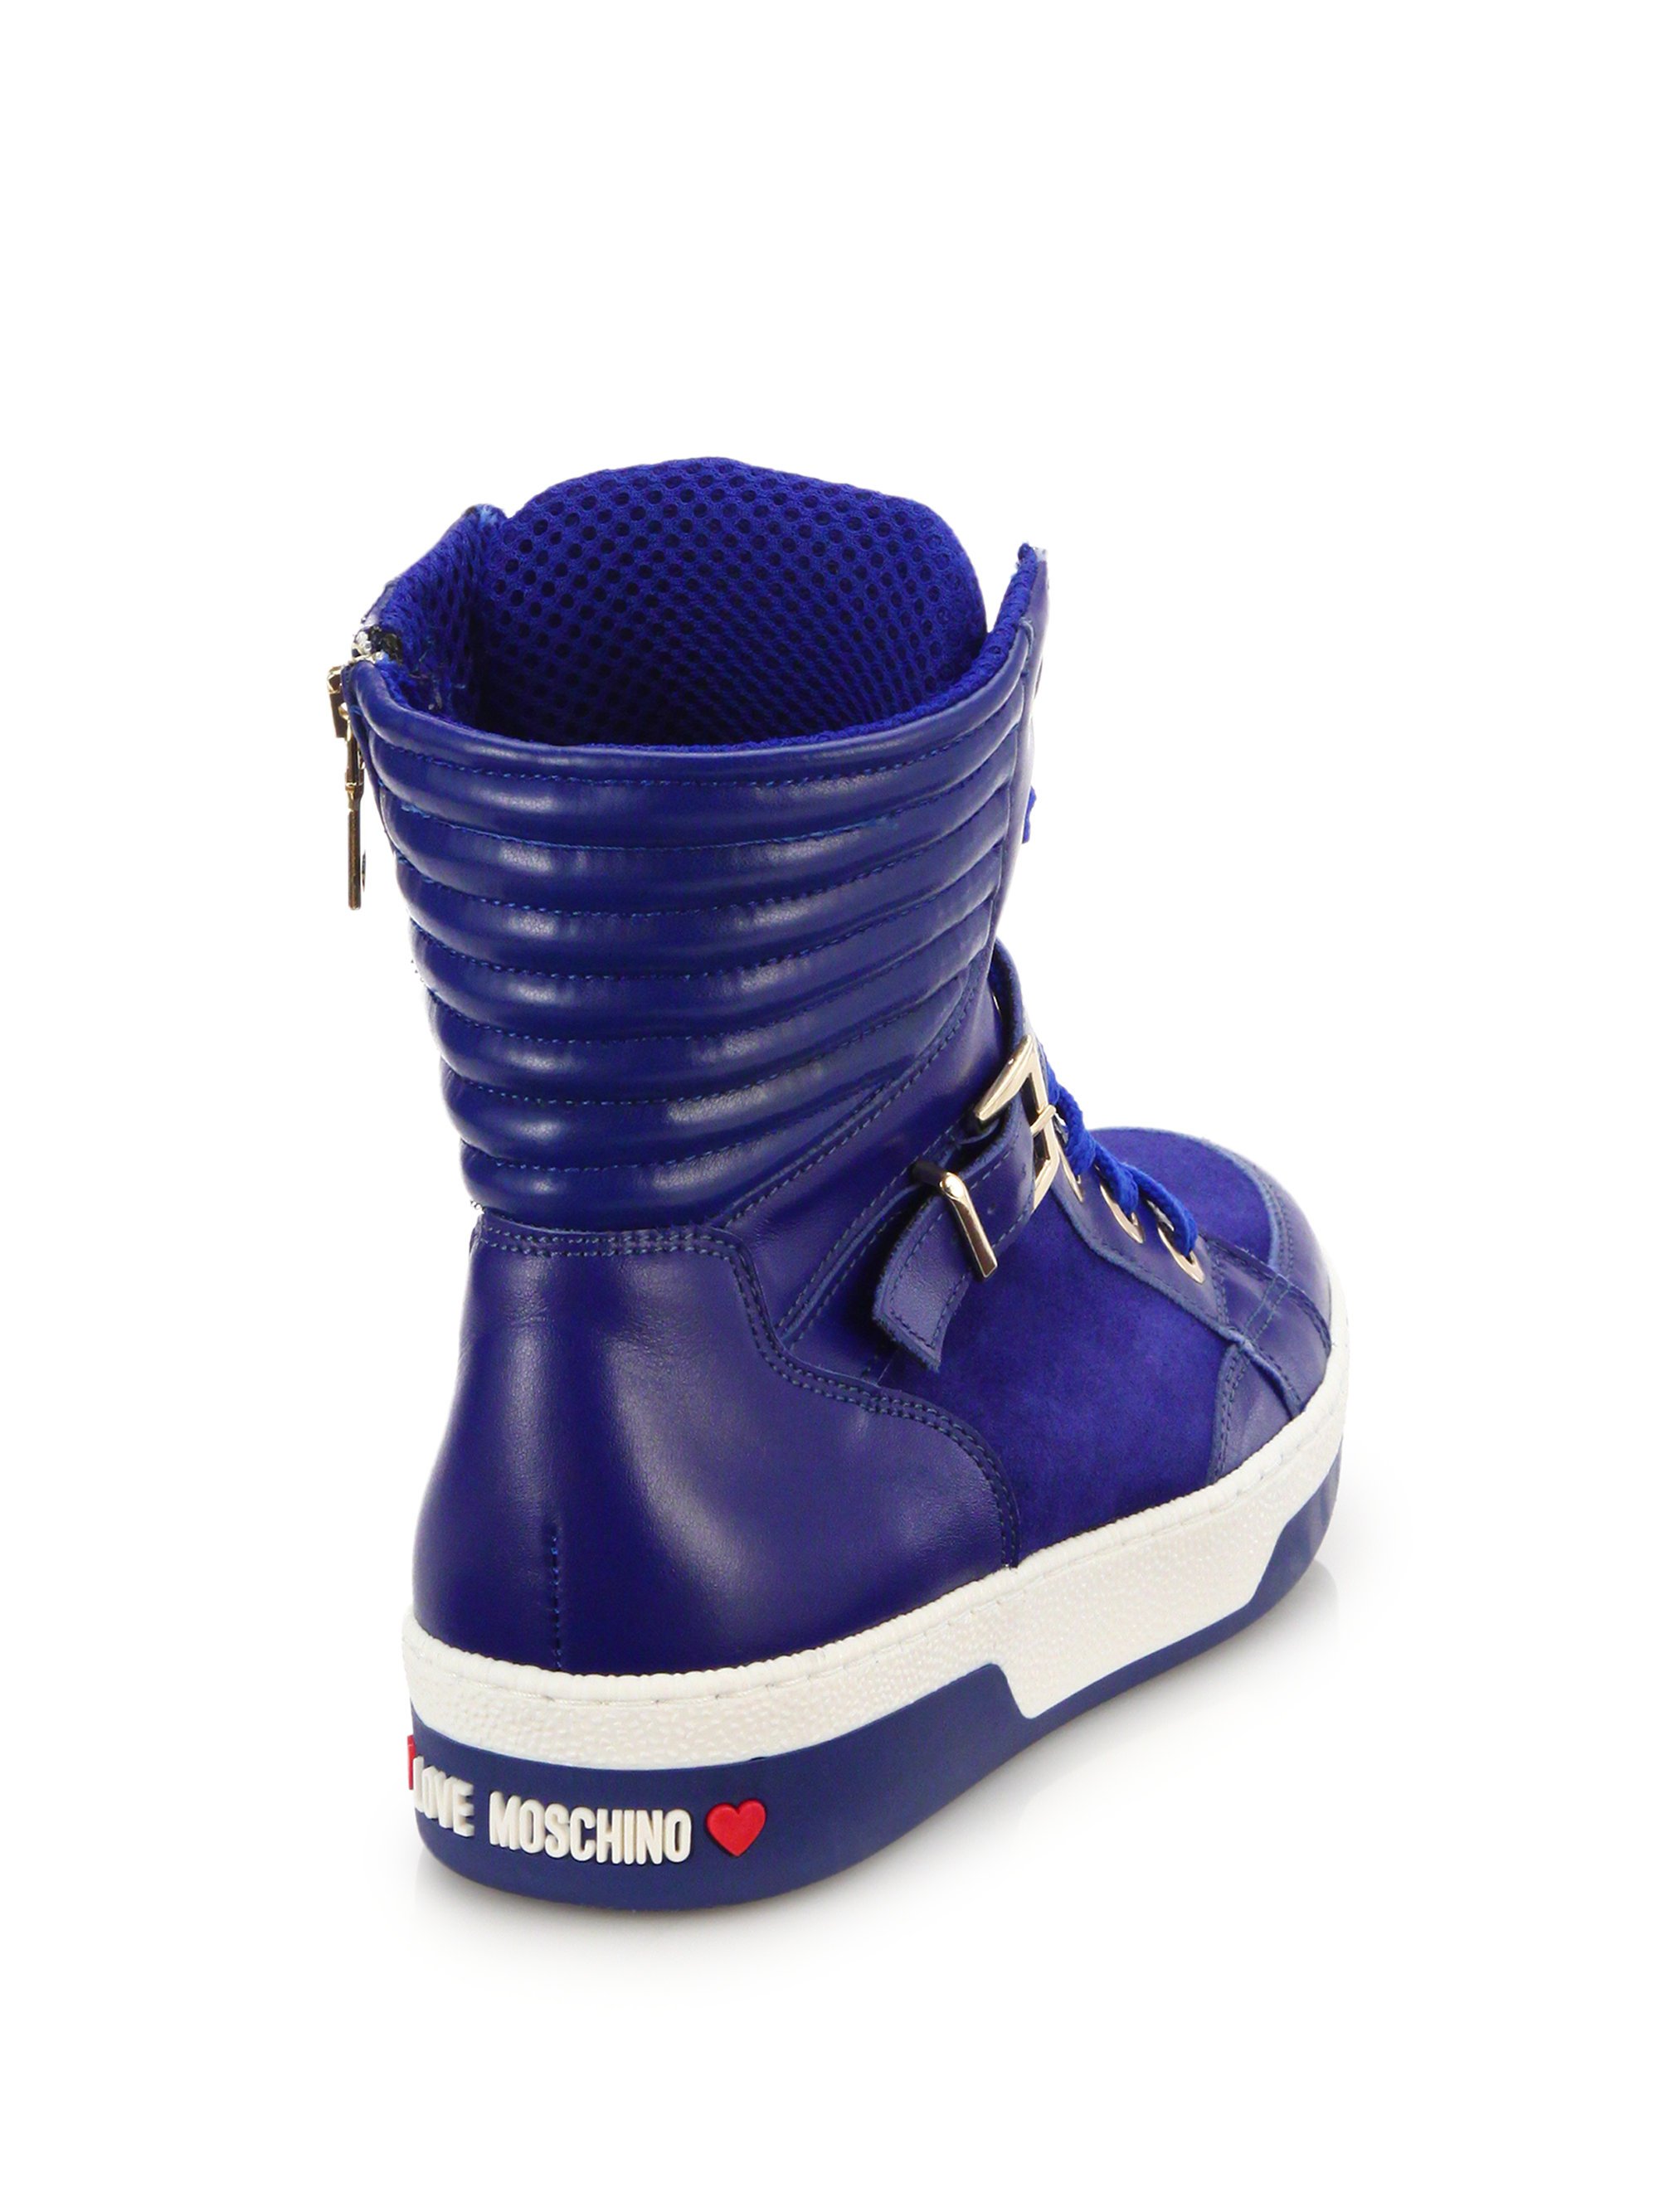 Love Moschino Leather & Suede High-top Buckle Sneakers in Blue | Lyst